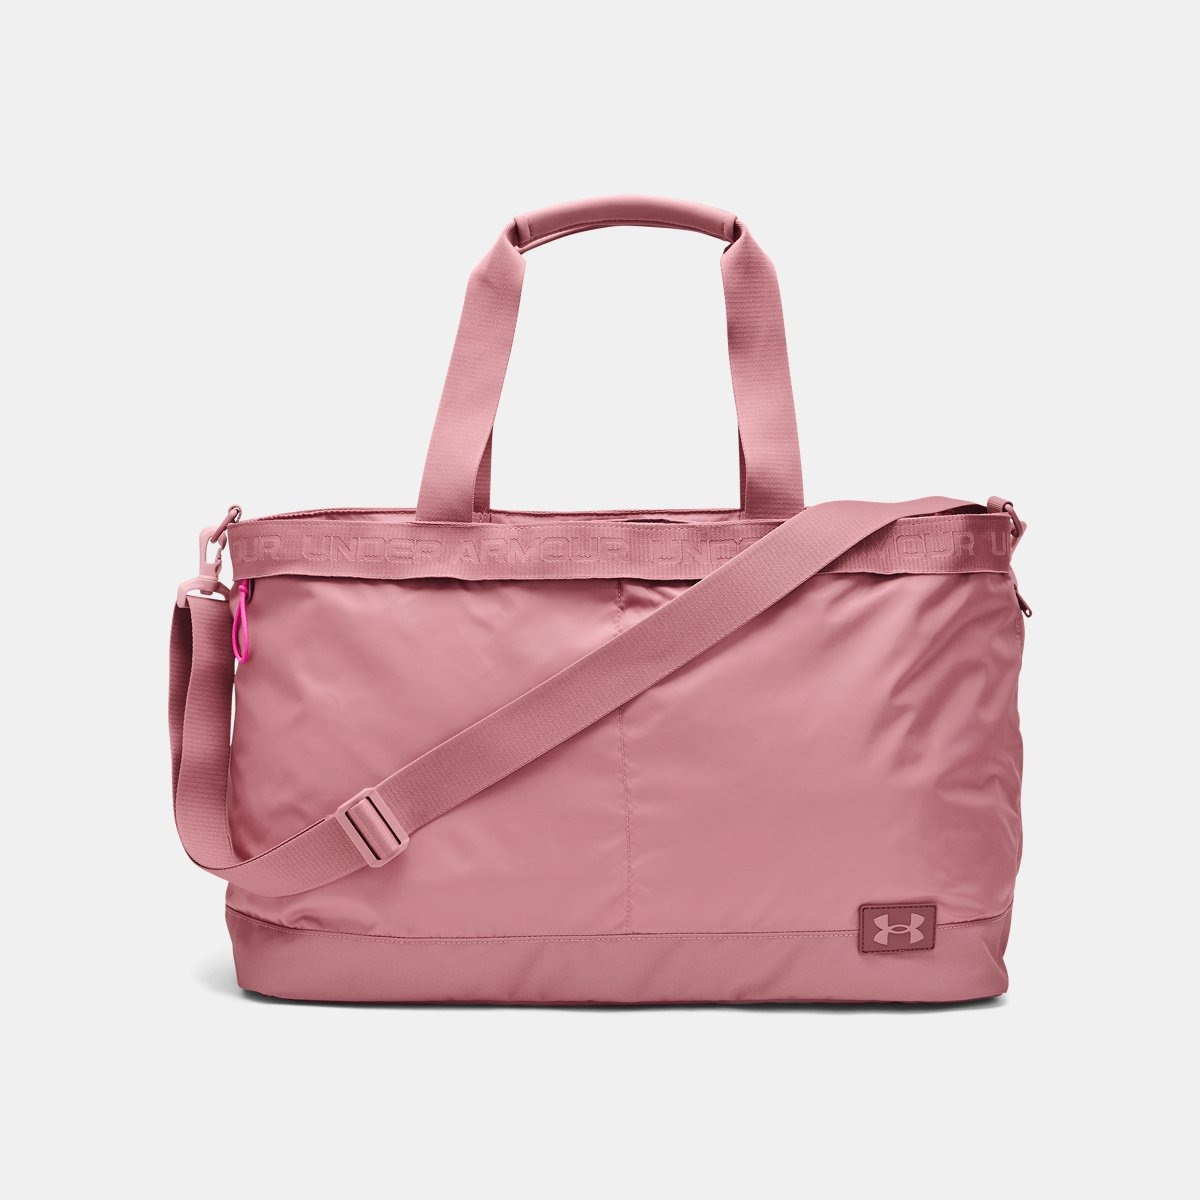 Under Armour - Tote Bag Pink - Woman GOOFASH